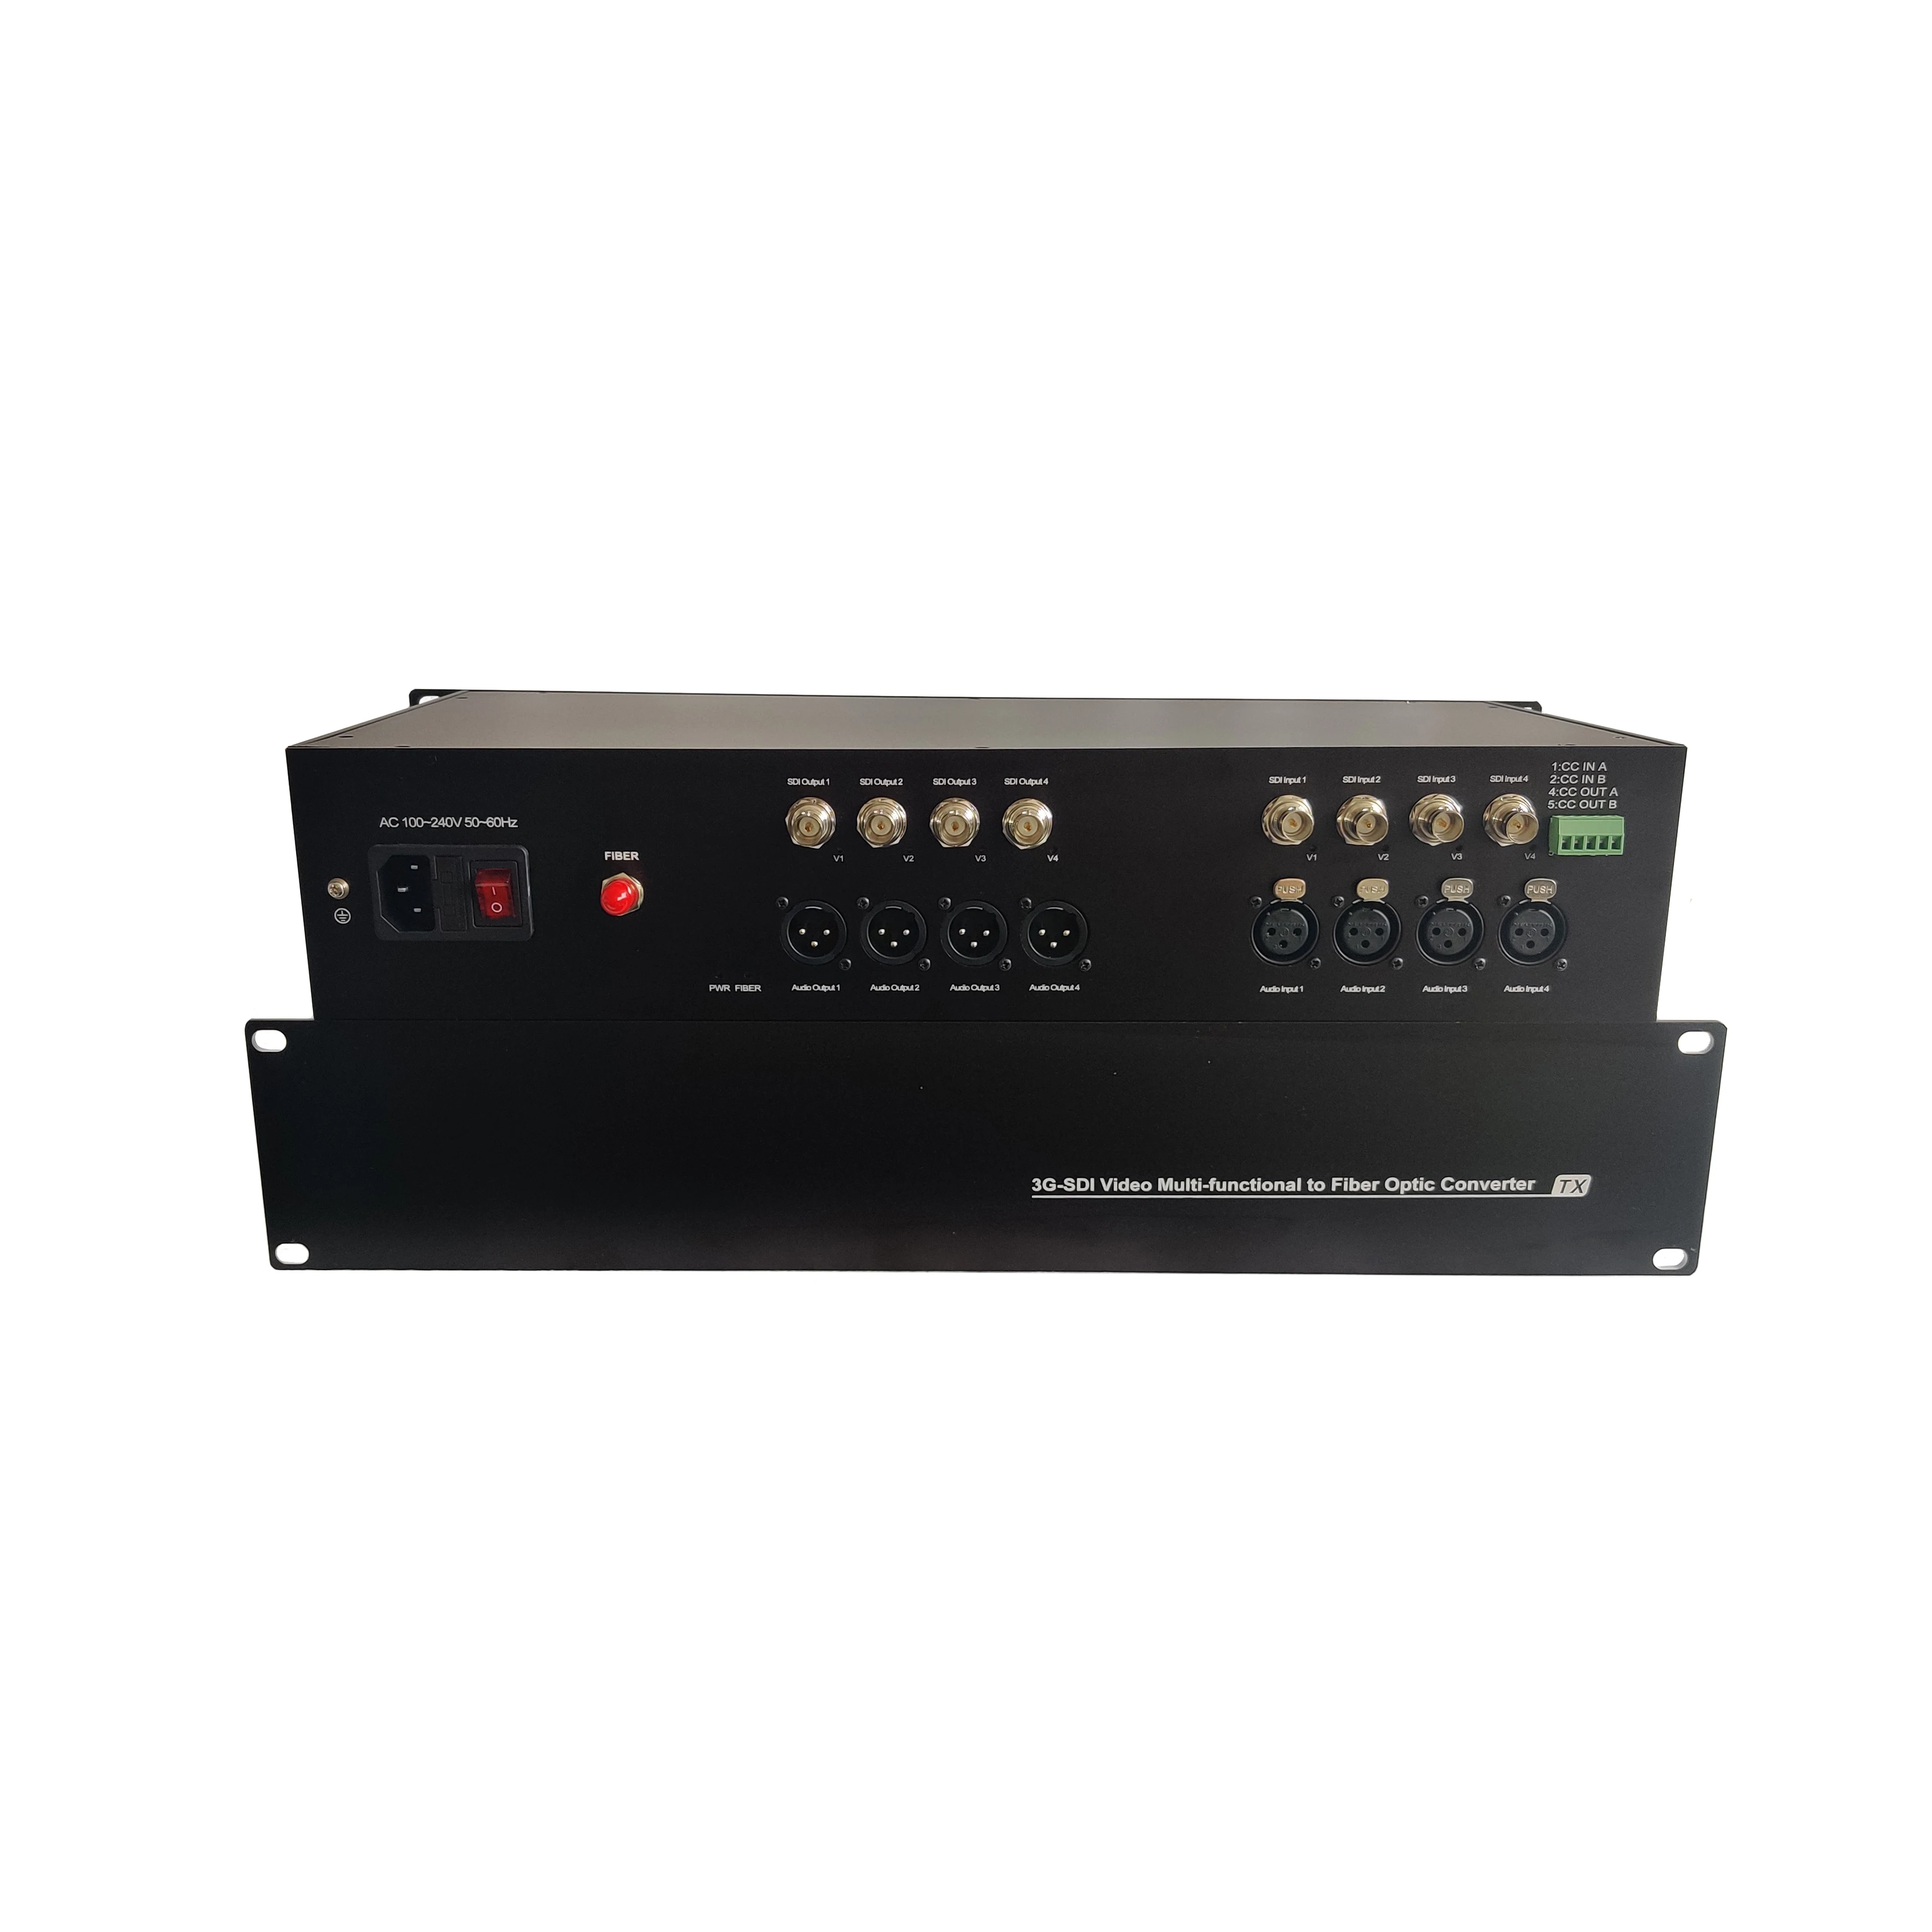 Broadcast Quality 12G/4K/3G/HD-SDI Video and XLR Audio to Optical Fiber Converter Extender Over Single Mode 1-core Fiber mini dvi fiber extender single mode fiber optic media converter 20km 1080p 60hz video transmitter and receiver